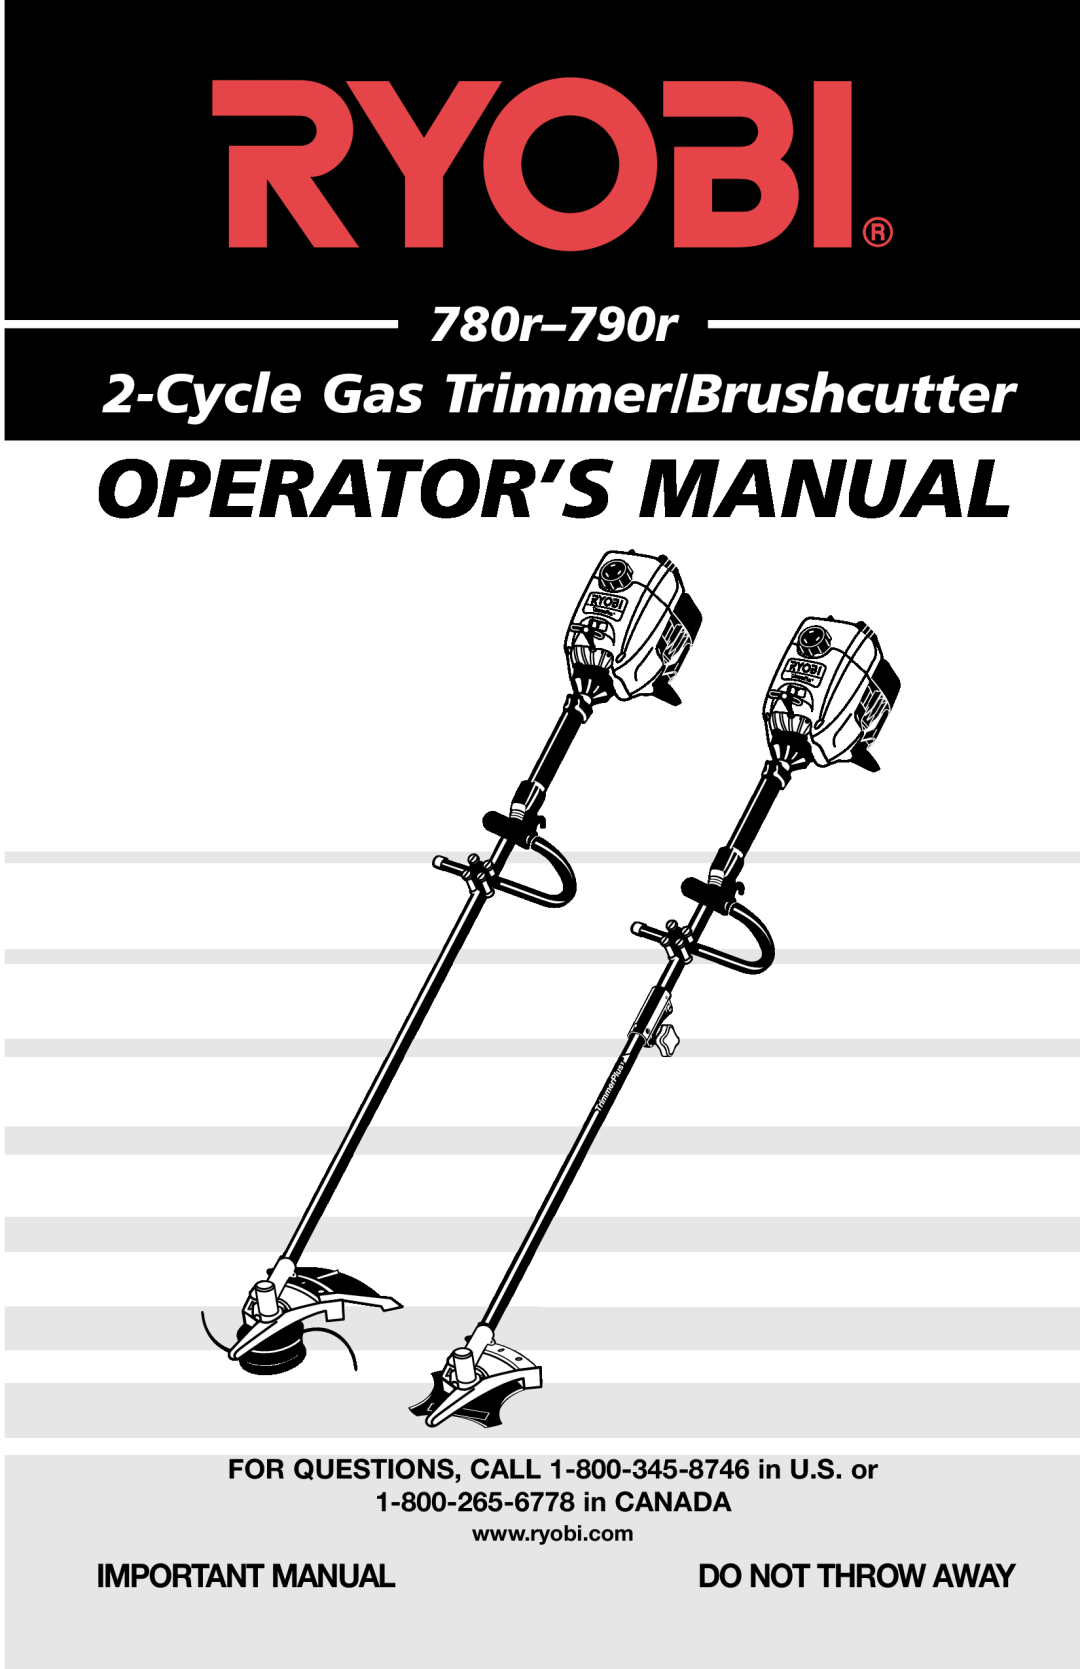 Ryobi manual Important Manual, FOR QUESTIONS, CALL 1-800-345-8746 in U.S. or, Operator’S Manual, 780r-790r 